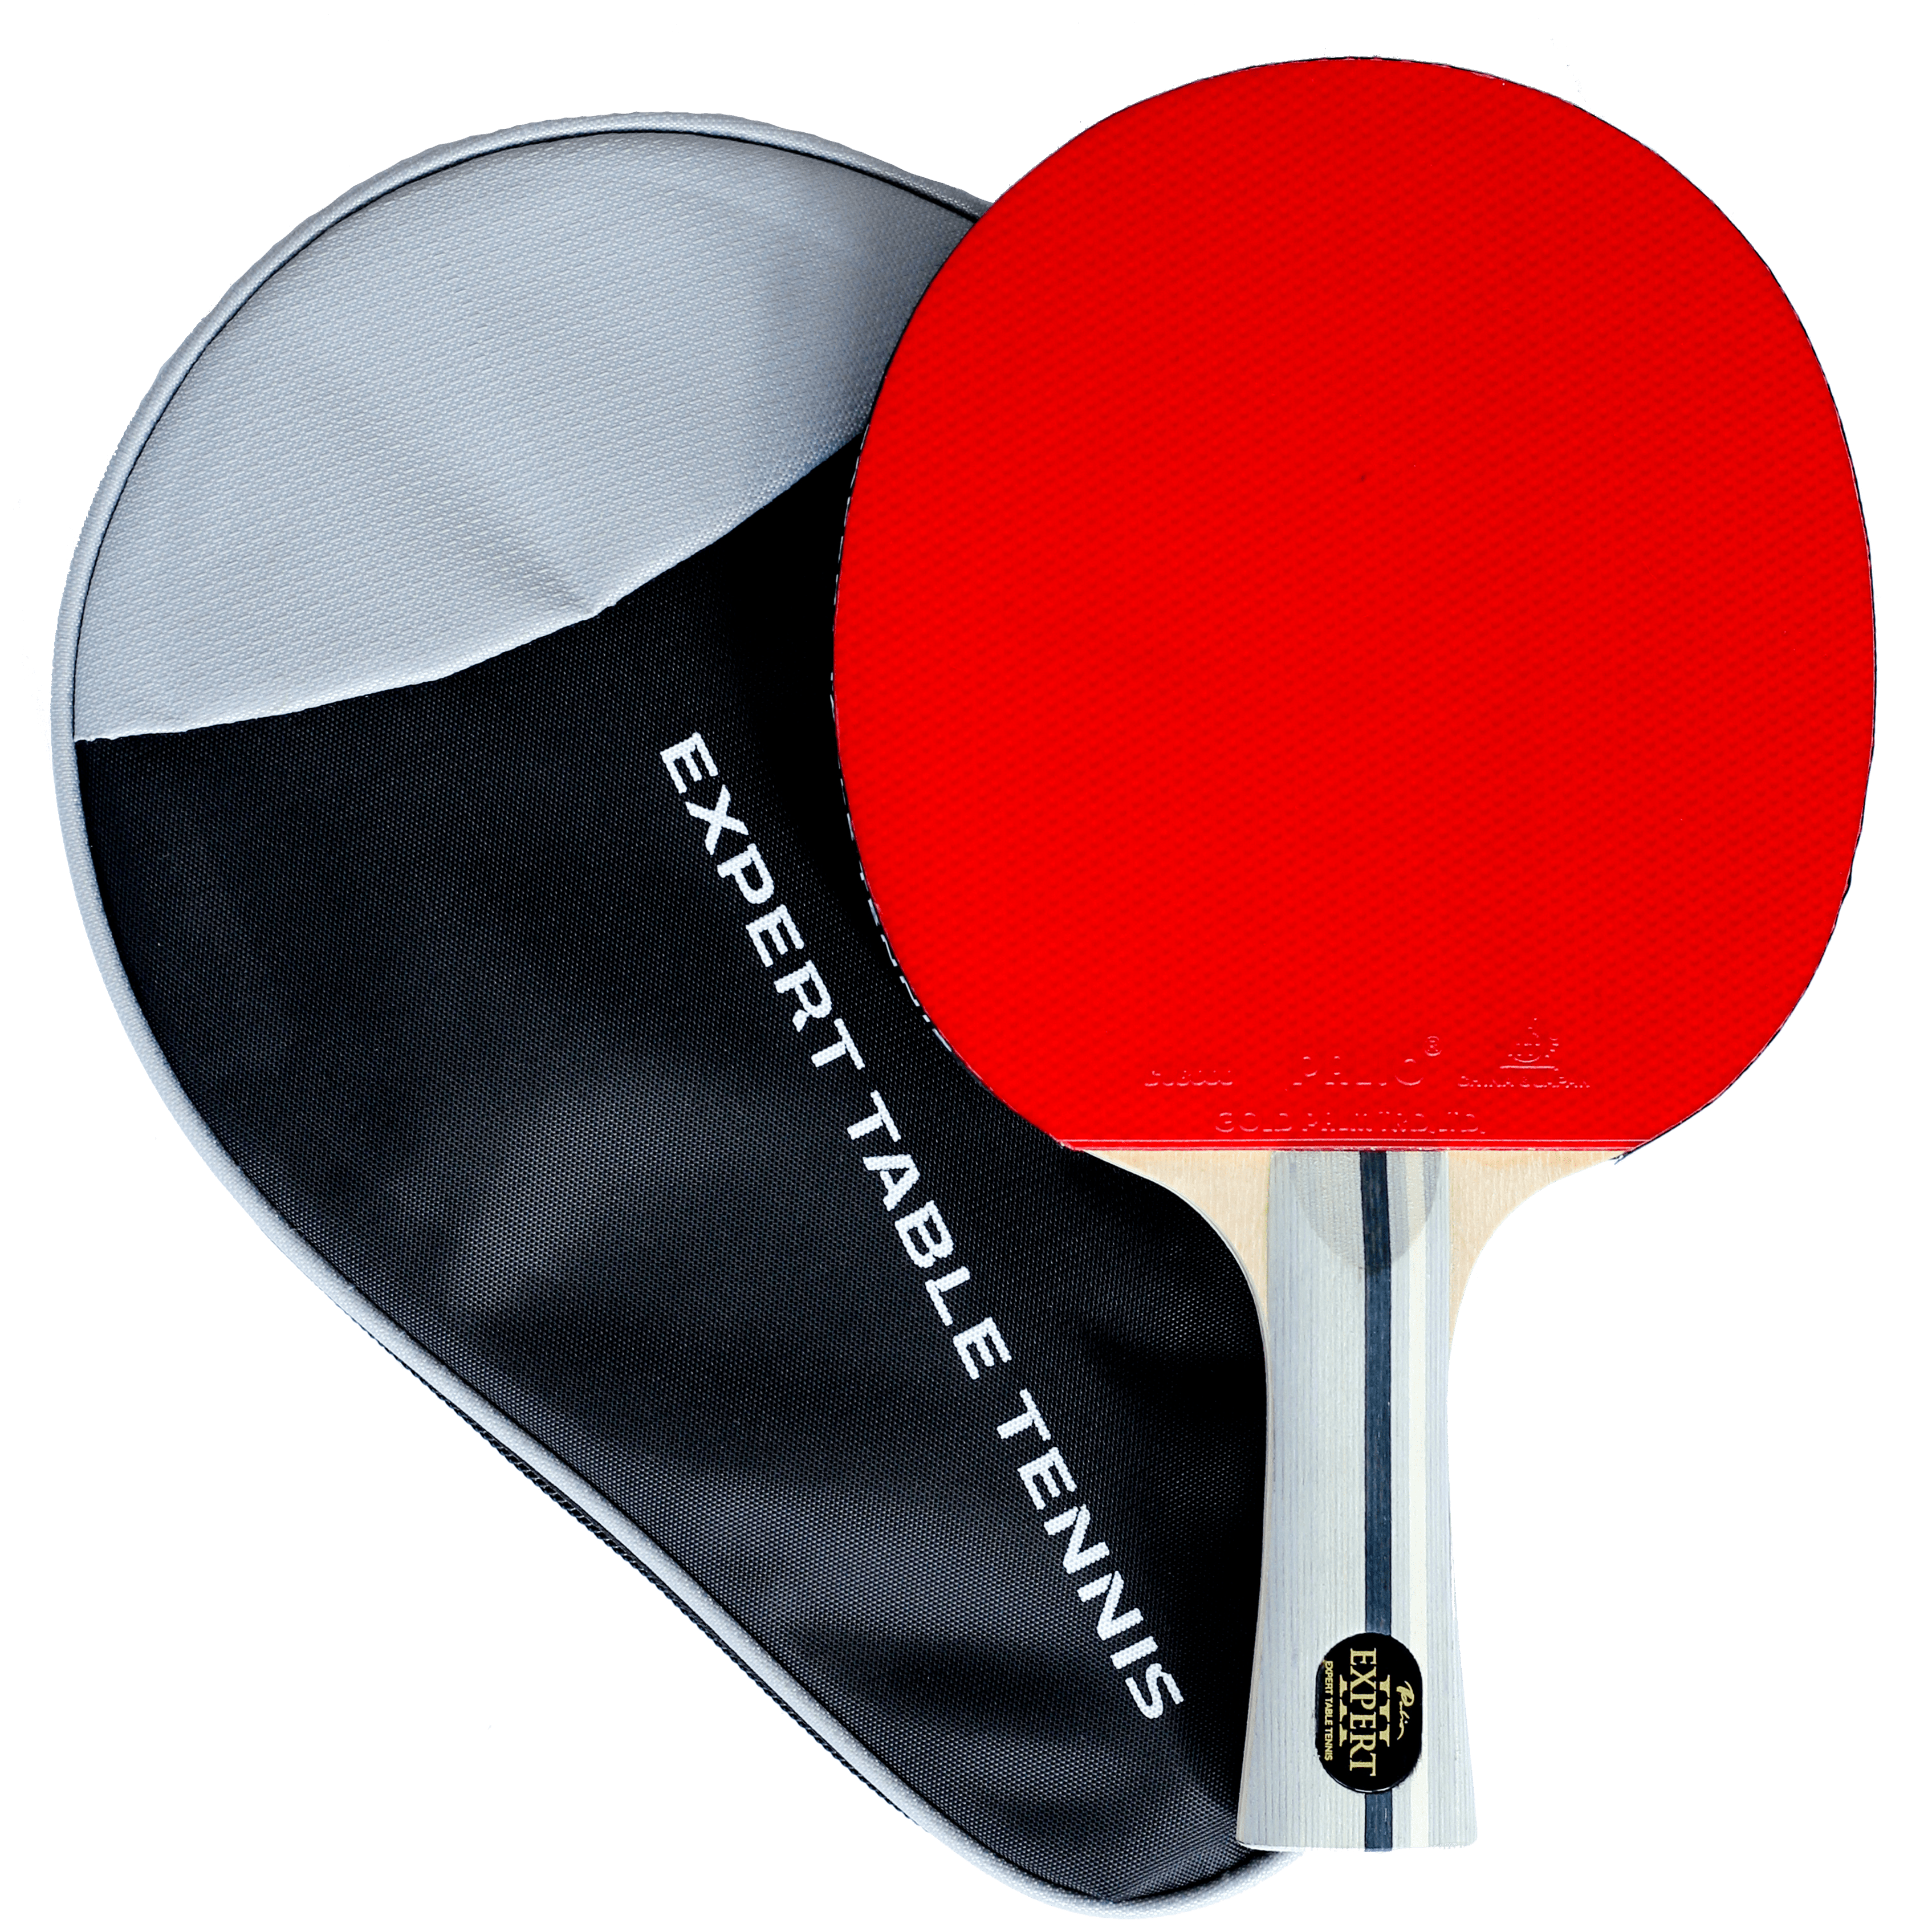 ABS ITTF Approved with seams UK SHOP 50 x Palio 3 Star Table Tennis Balls S40 